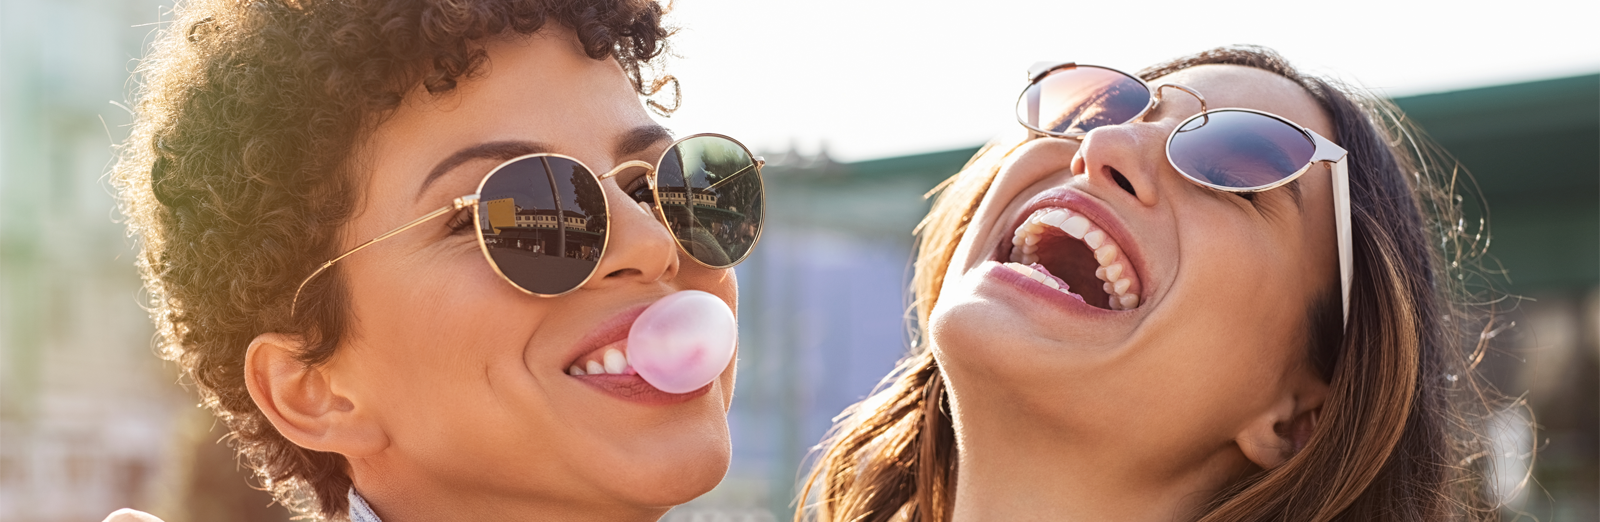 Two women with sunglasses outside in the sun smiling and laughing